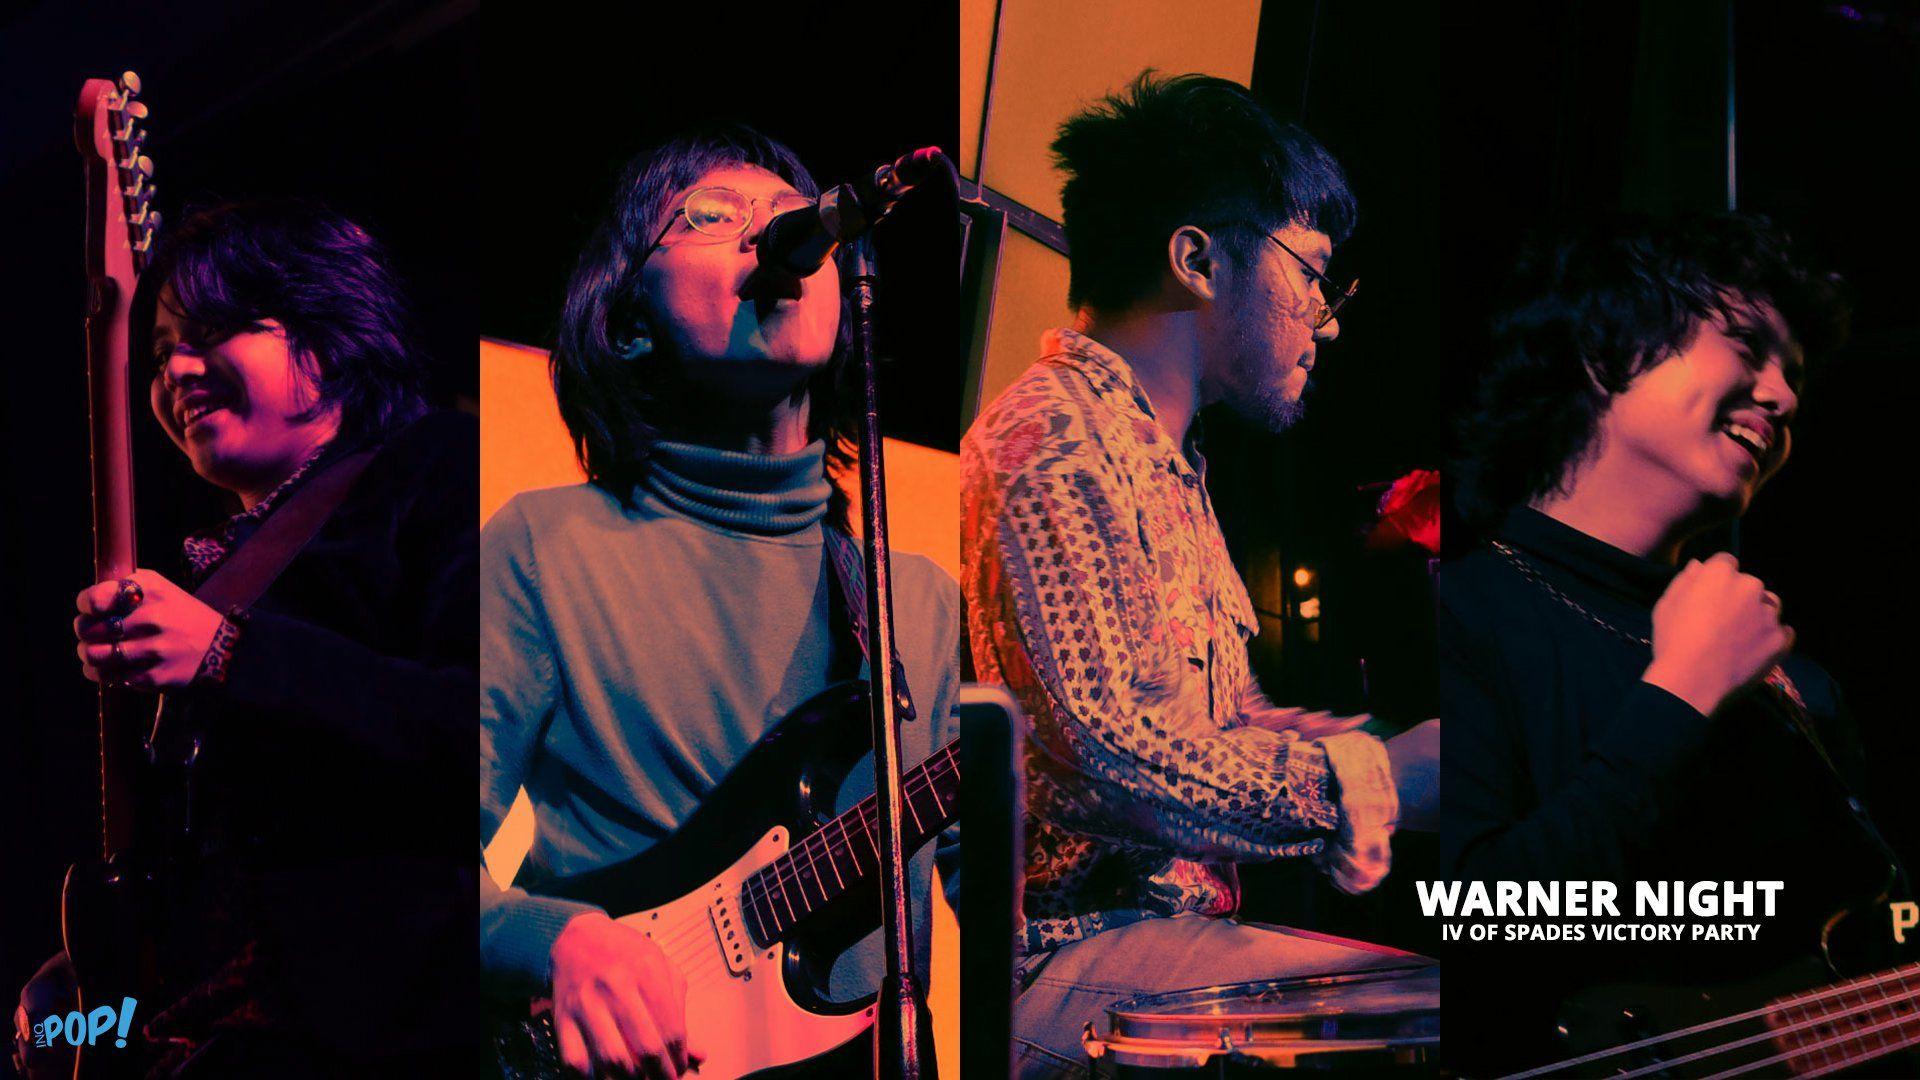 IN PHOTOS: IV of Spades hold a killer show for their Victory Party